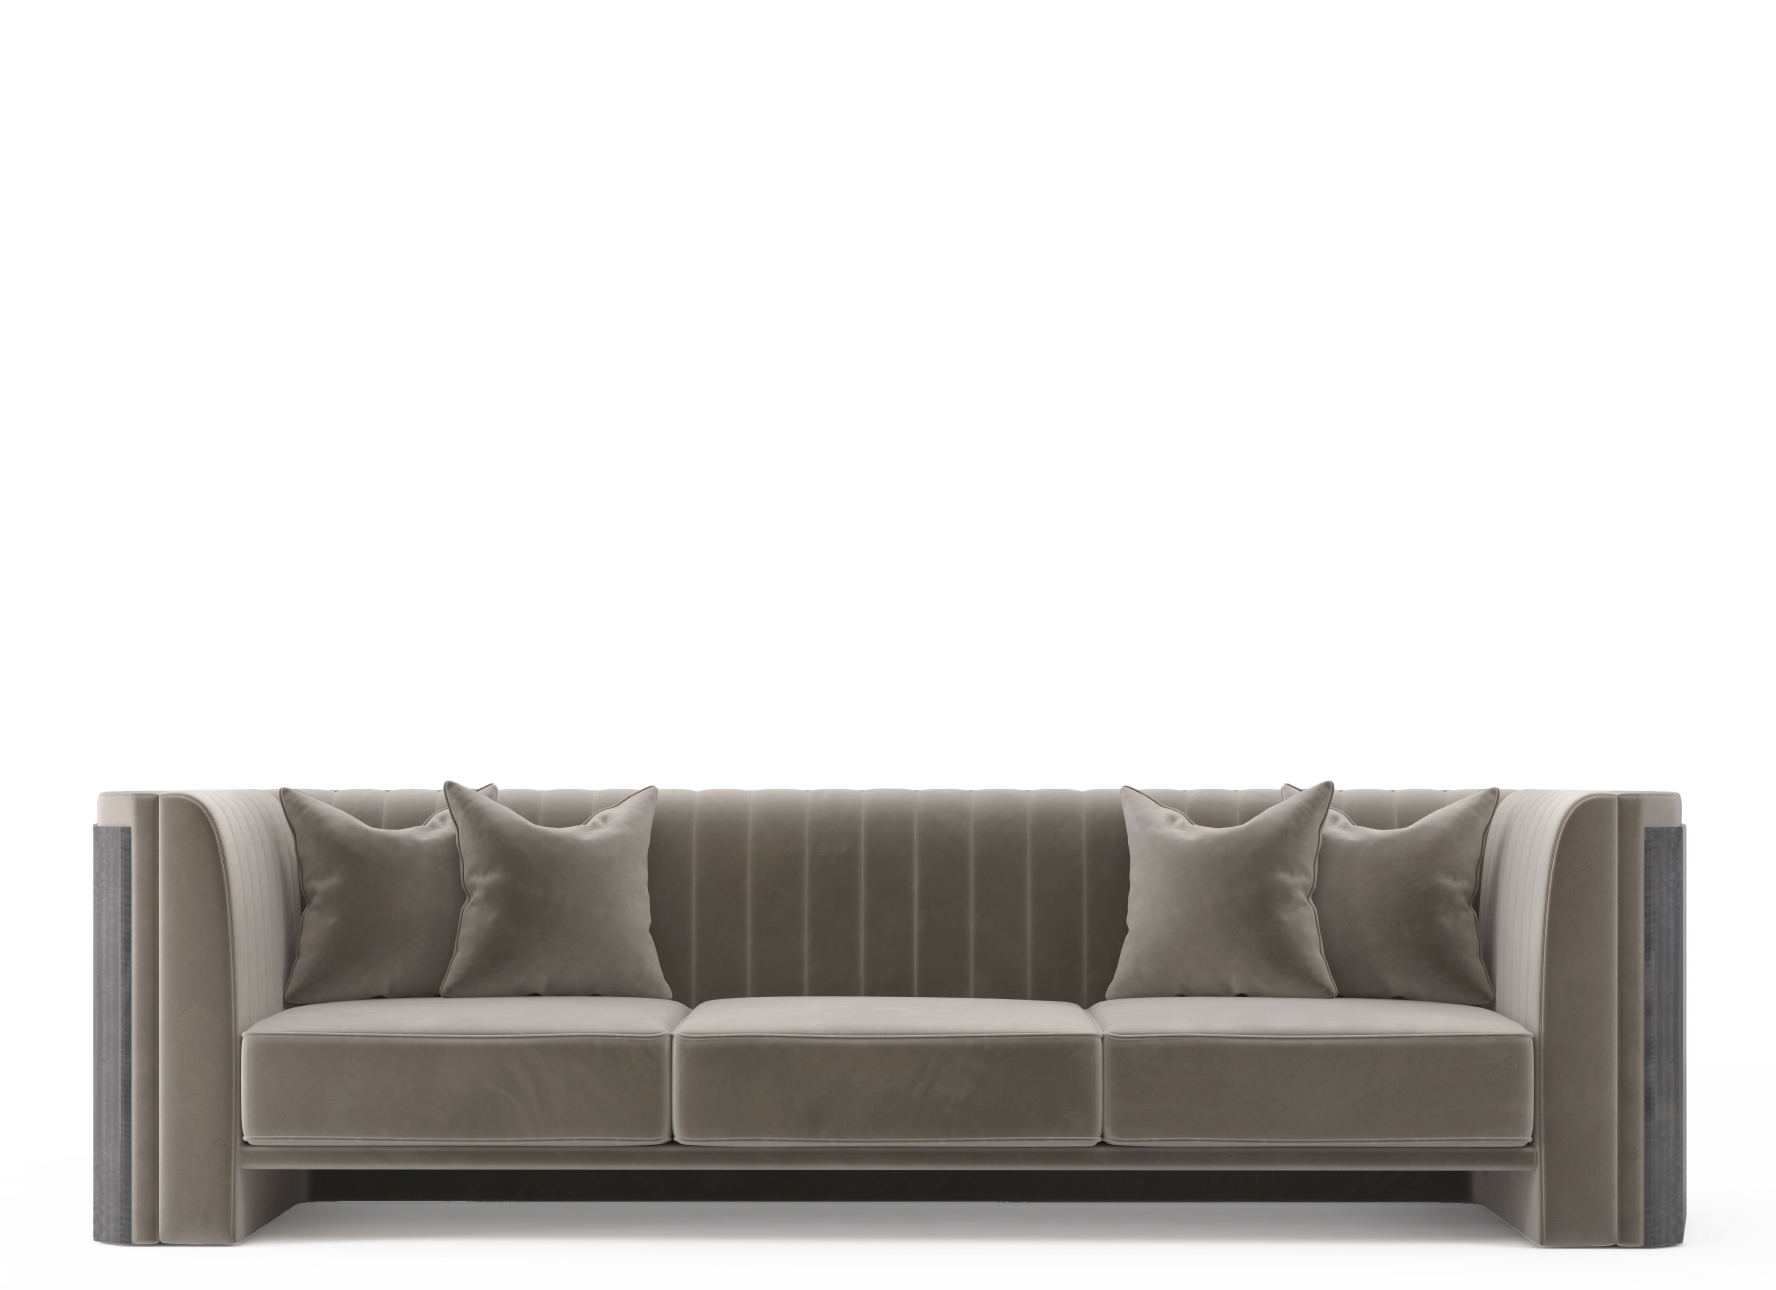 Algerone Sofa - The Ultimate Expression Of Comfort And Luxury!